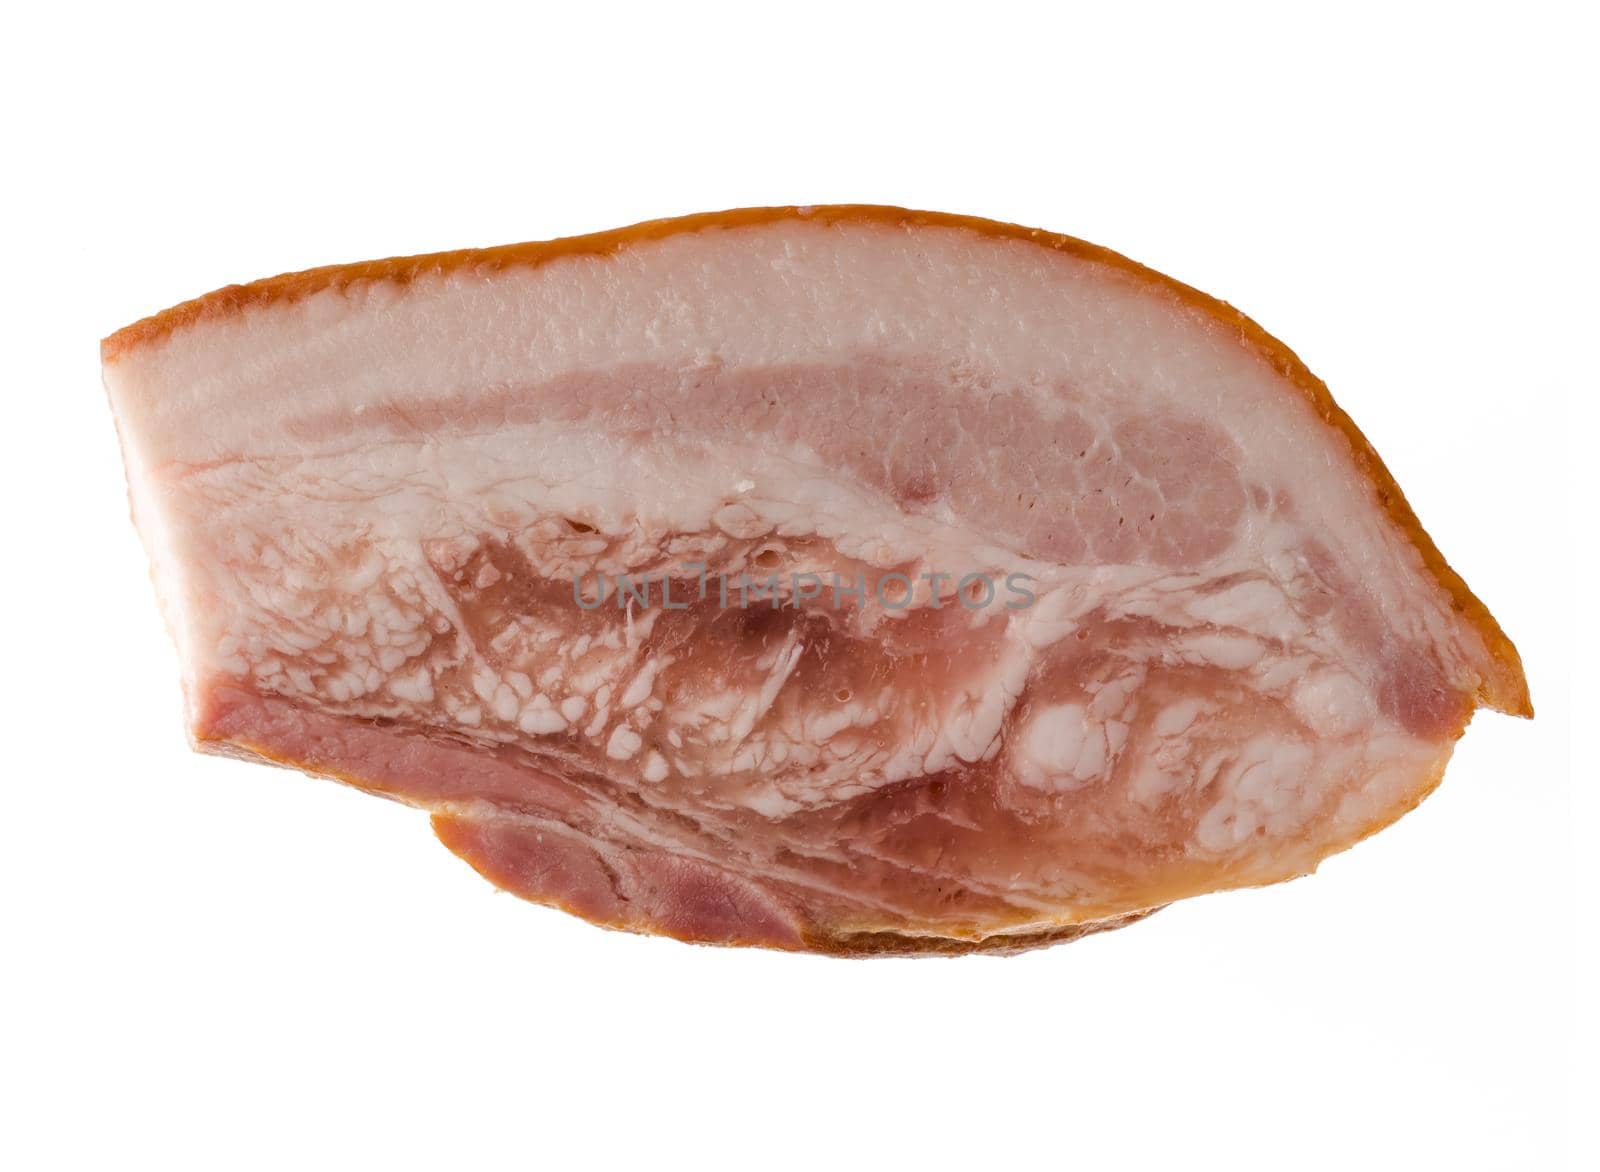 Thick piece of ready-made appetizing, smoked, pork lard with layers of meat, on a white background in isolation